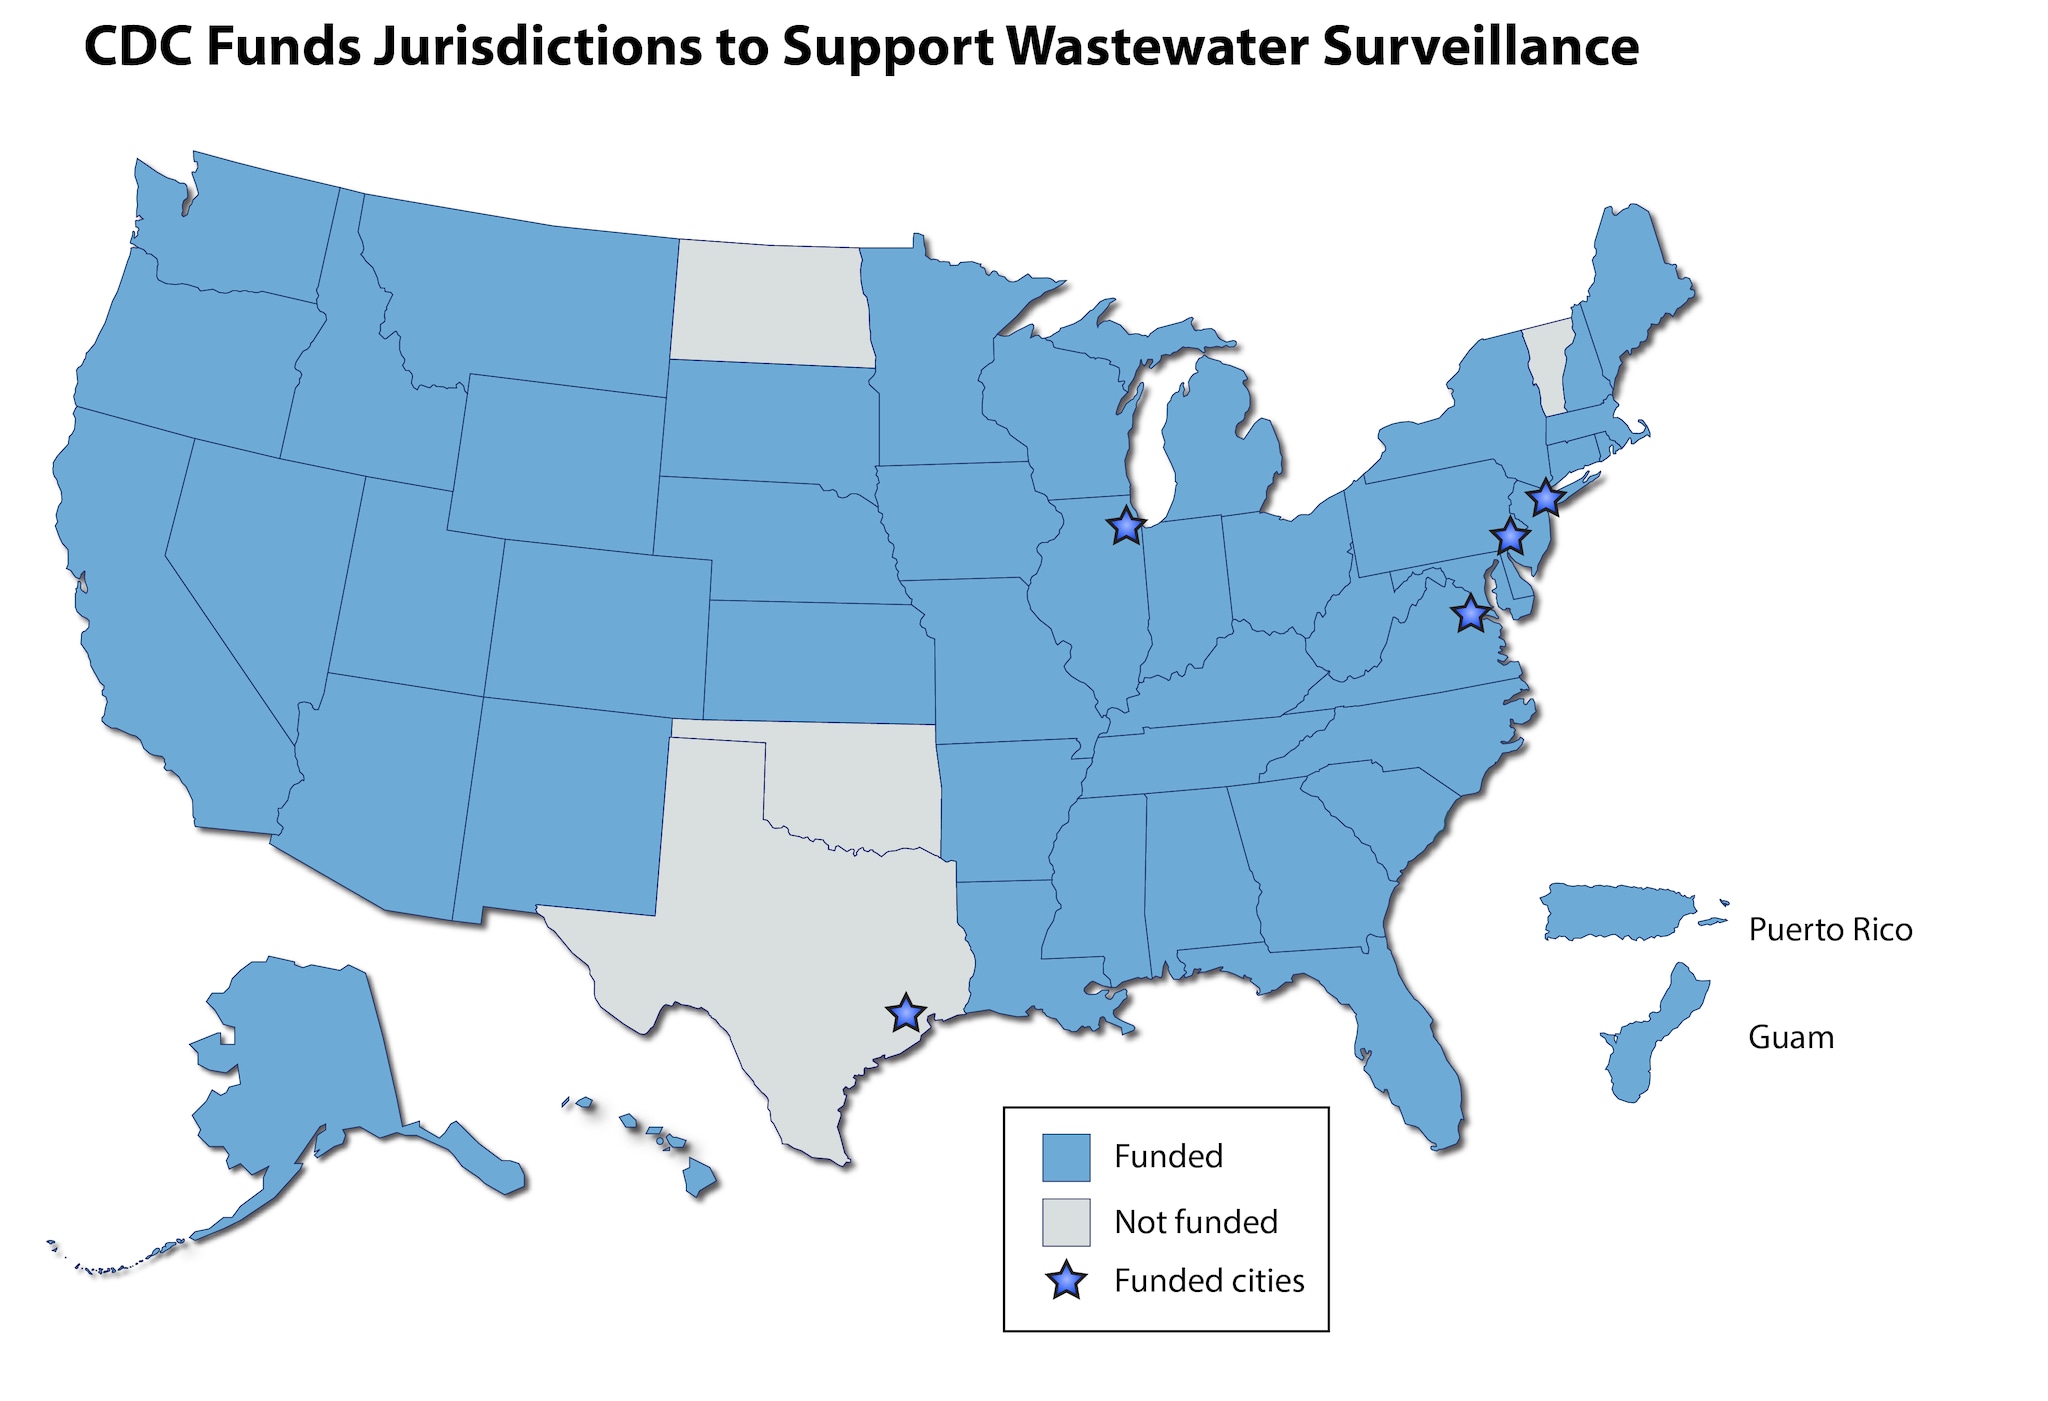 CDC Funds Jurisdictions to Support Wastewater Surveillance